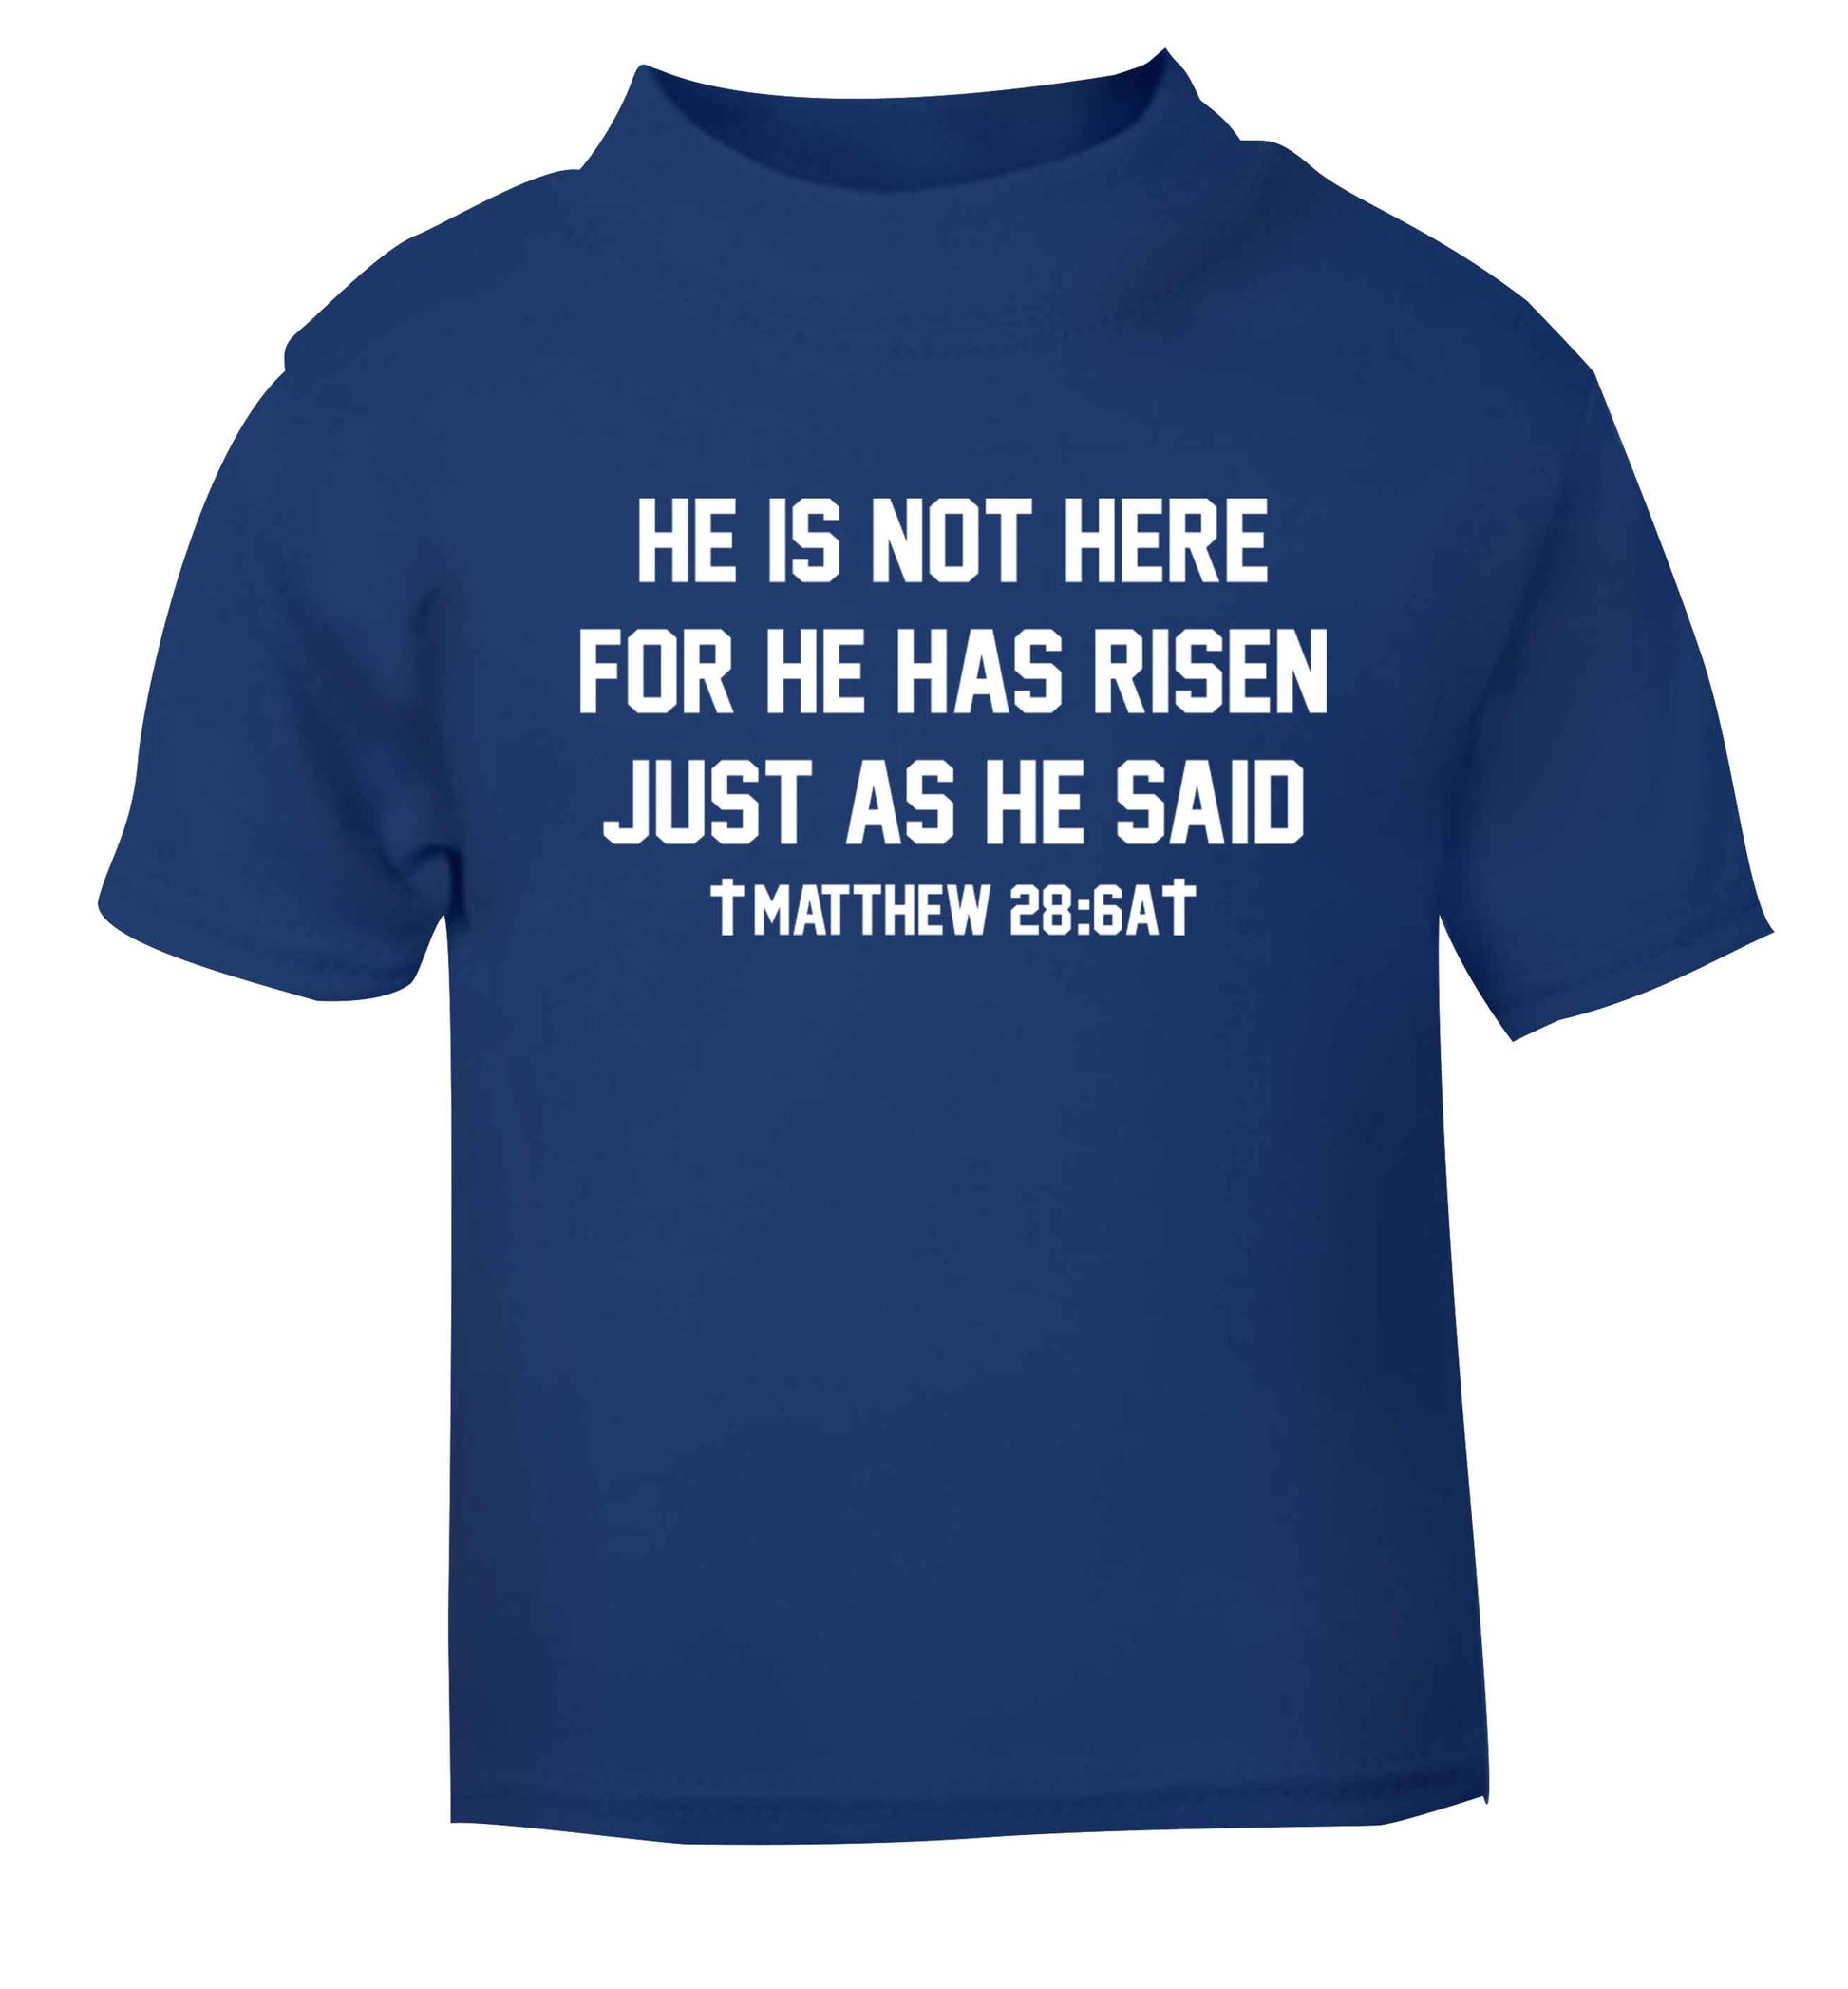 He is not here for he has risen just as he said matthew 28:6A blue baby toddler Tshirt 2 Years